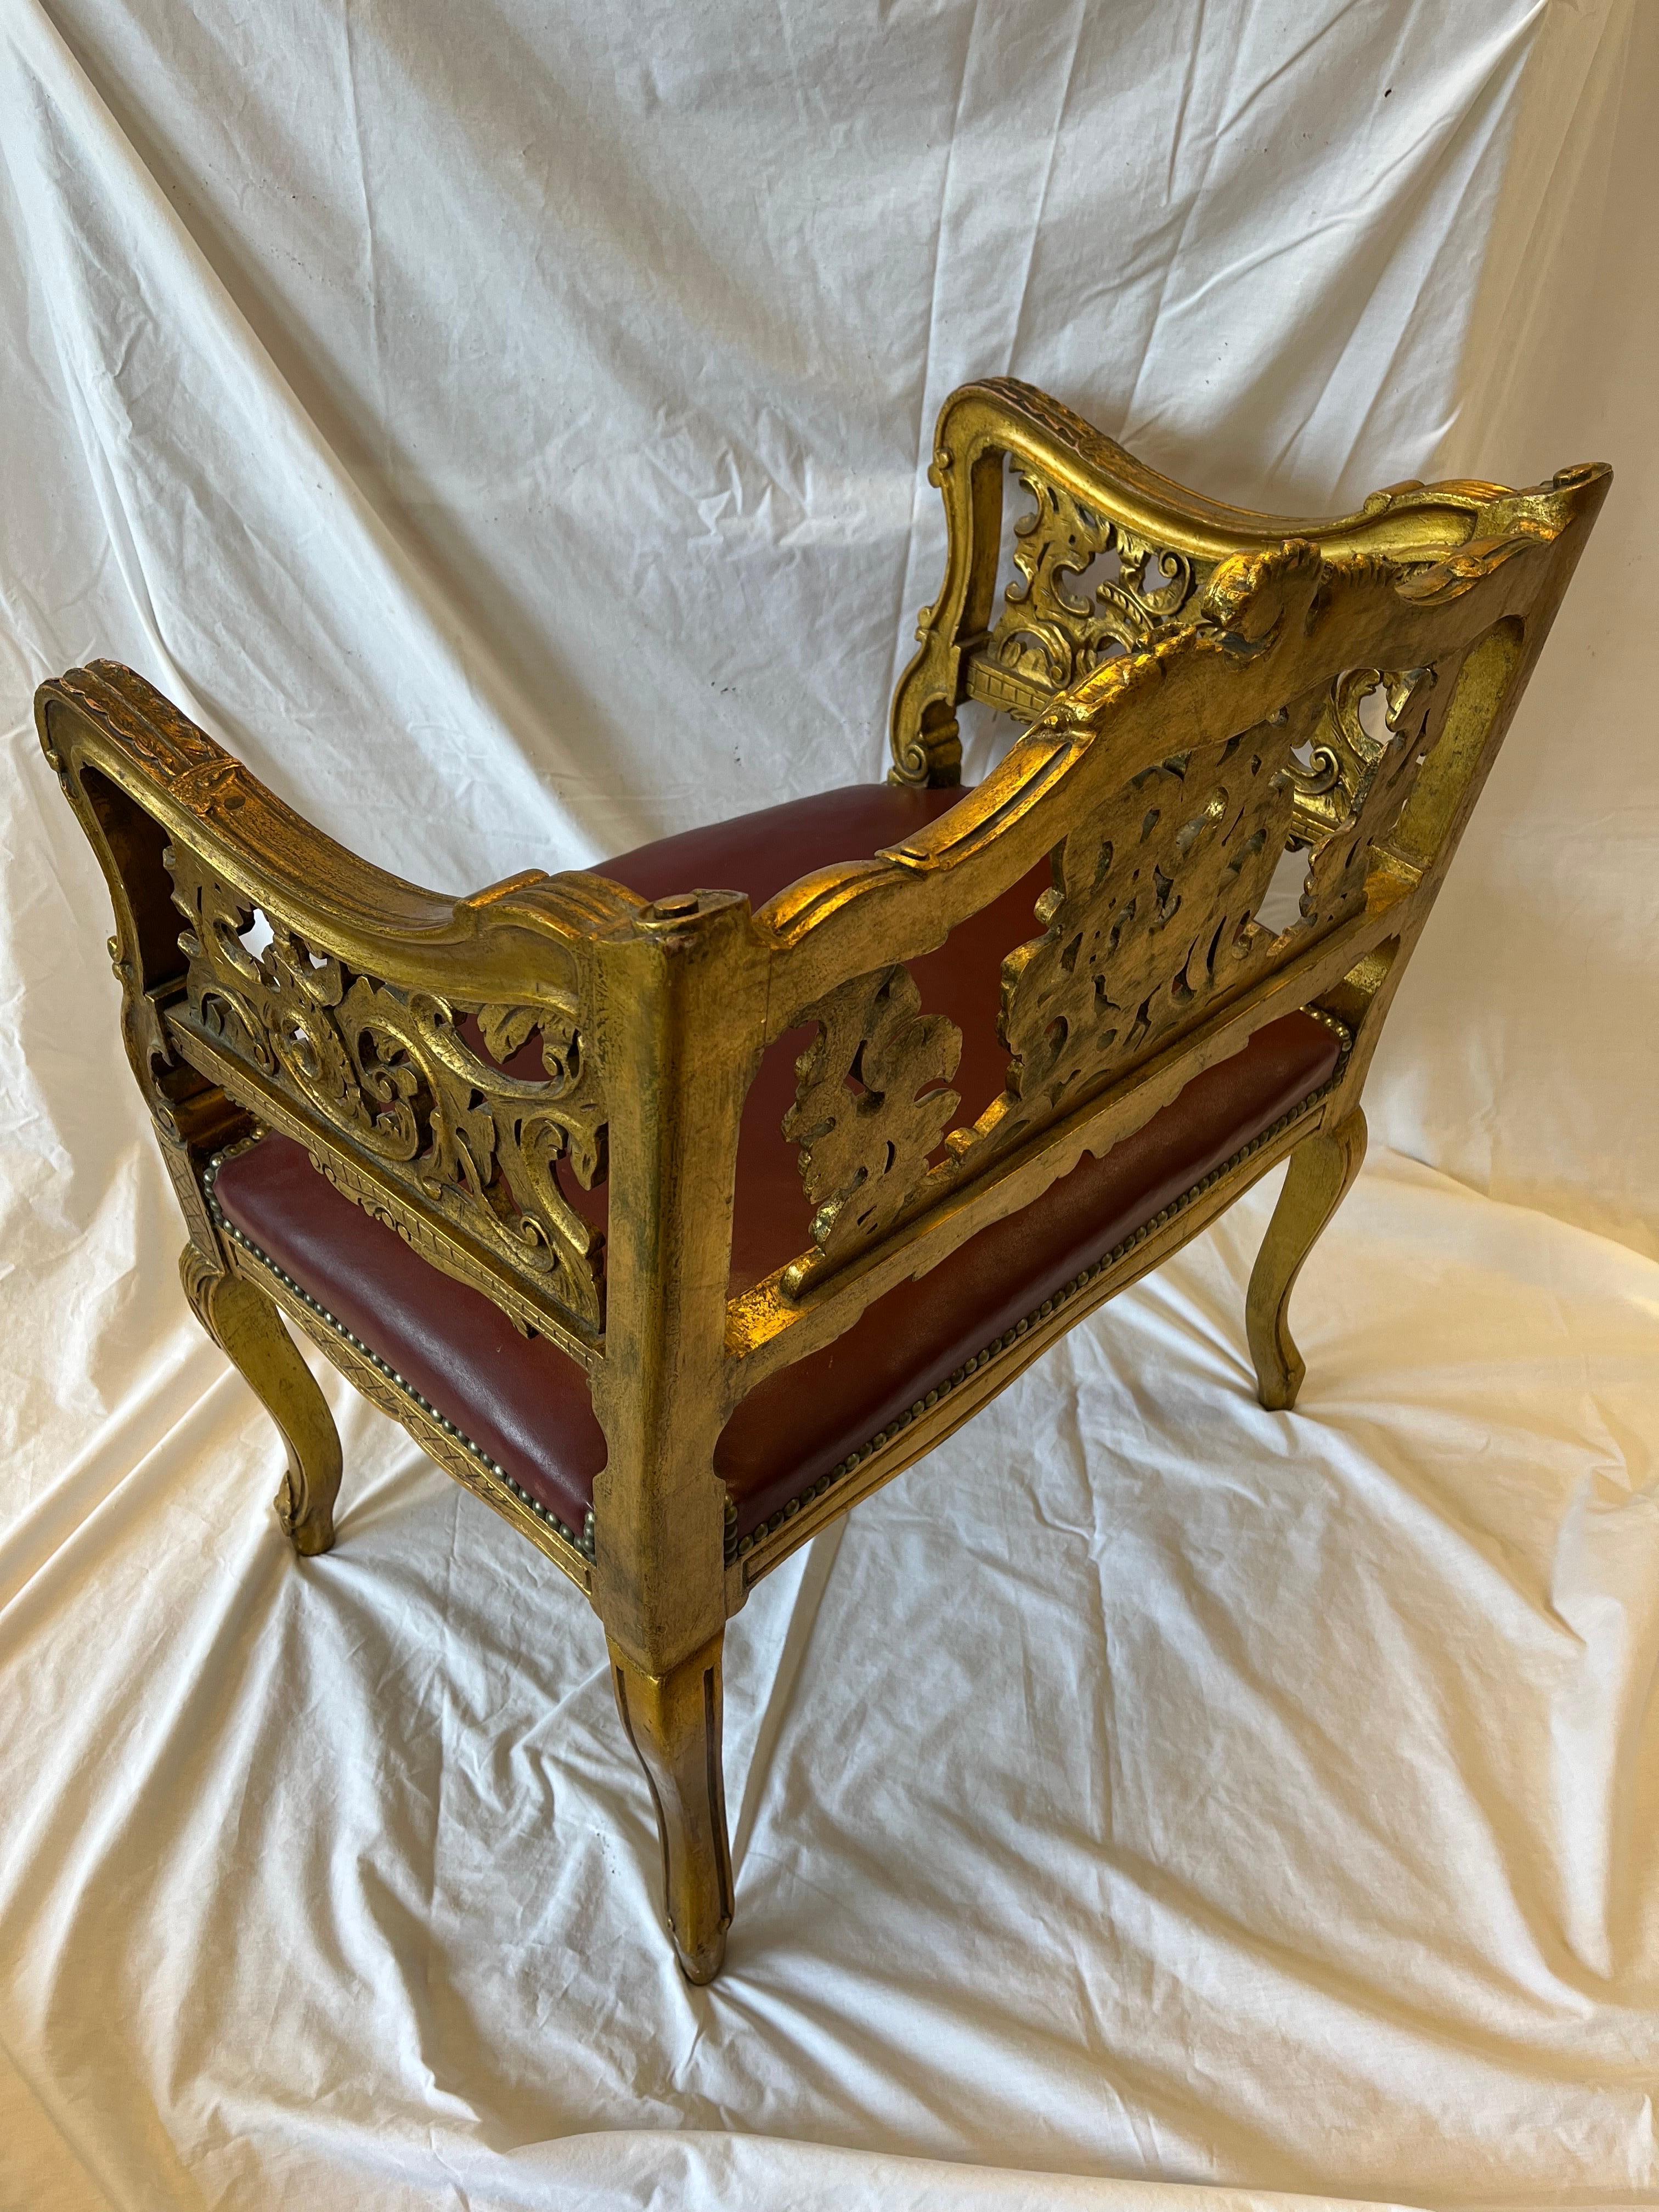 Antique Carved and Gilt Wood Arm Chair Bench Ornate Design Red Upholstered Seat For Sale 12